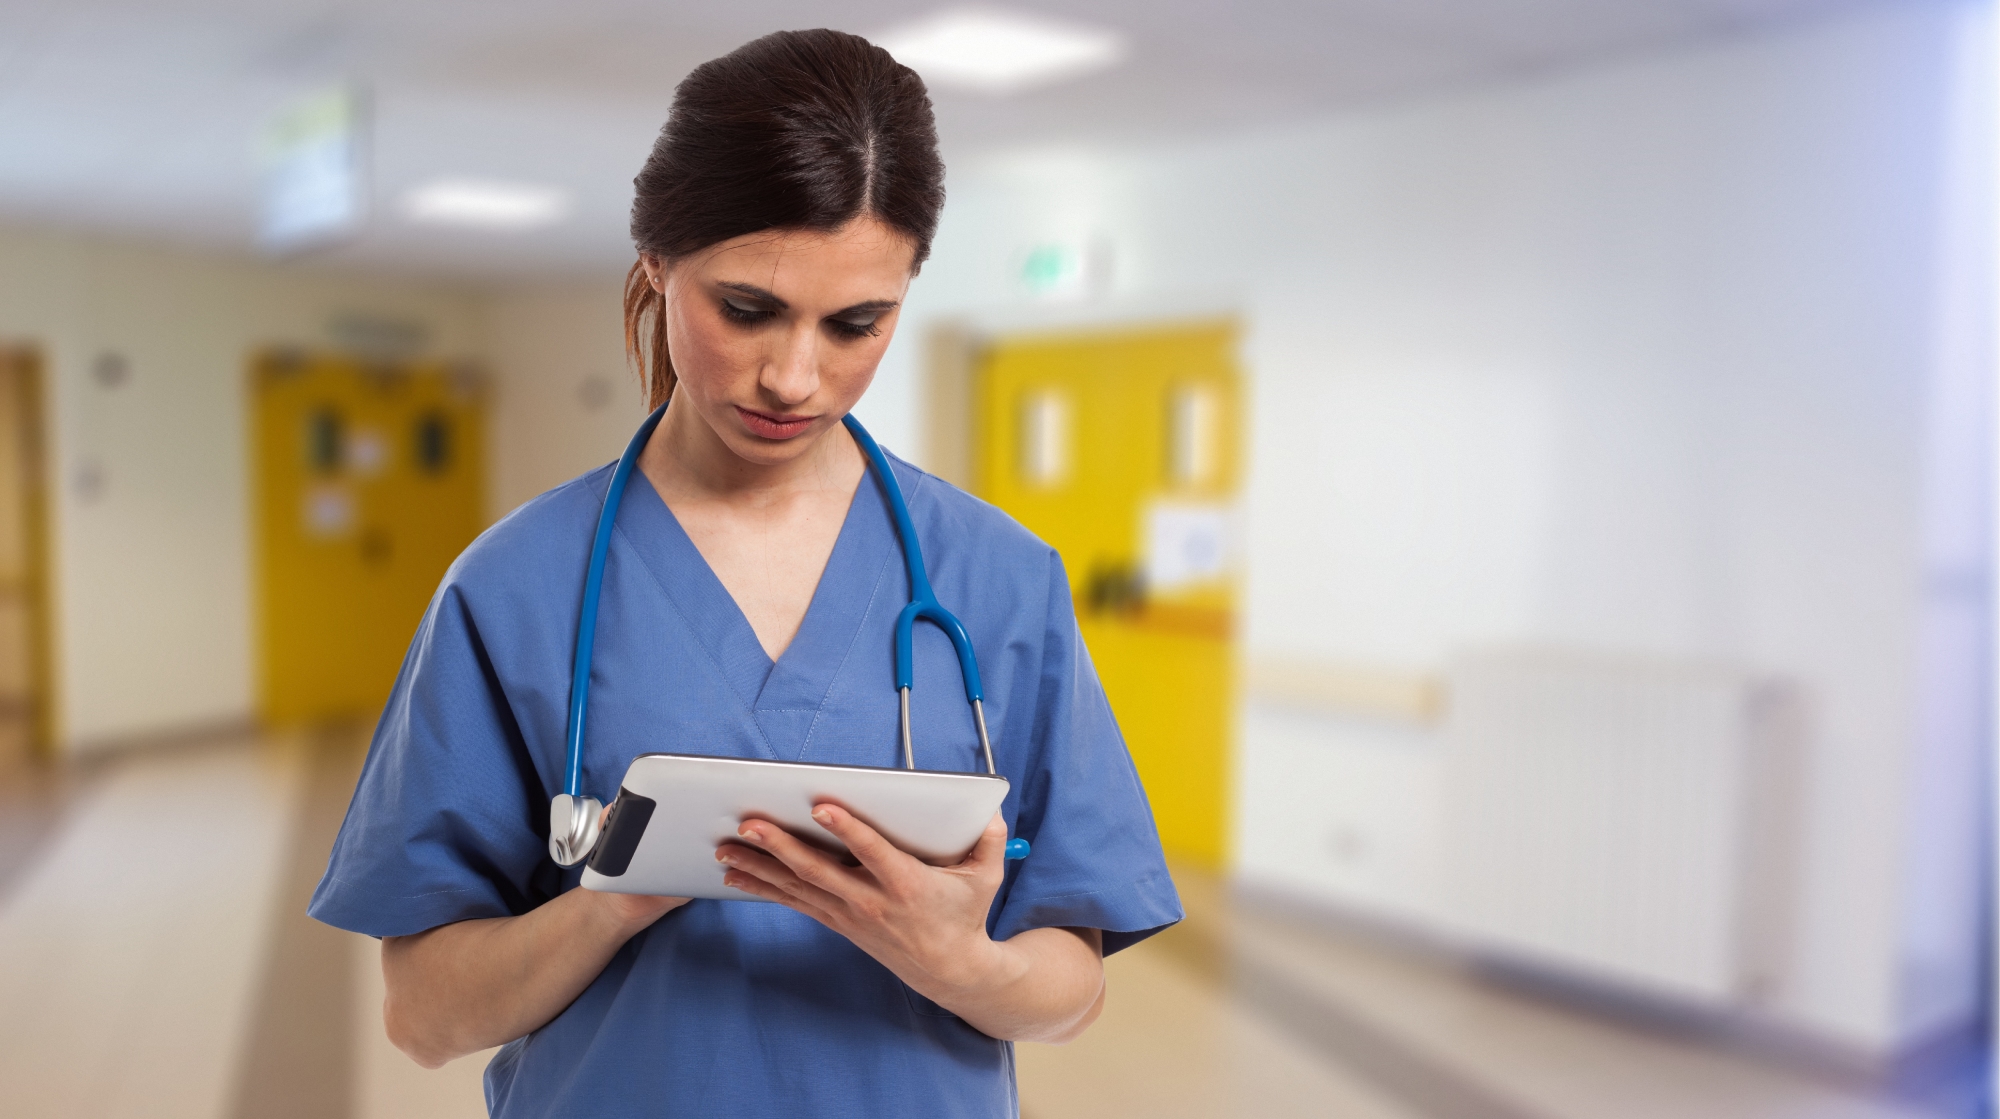 image of nurse with tablet